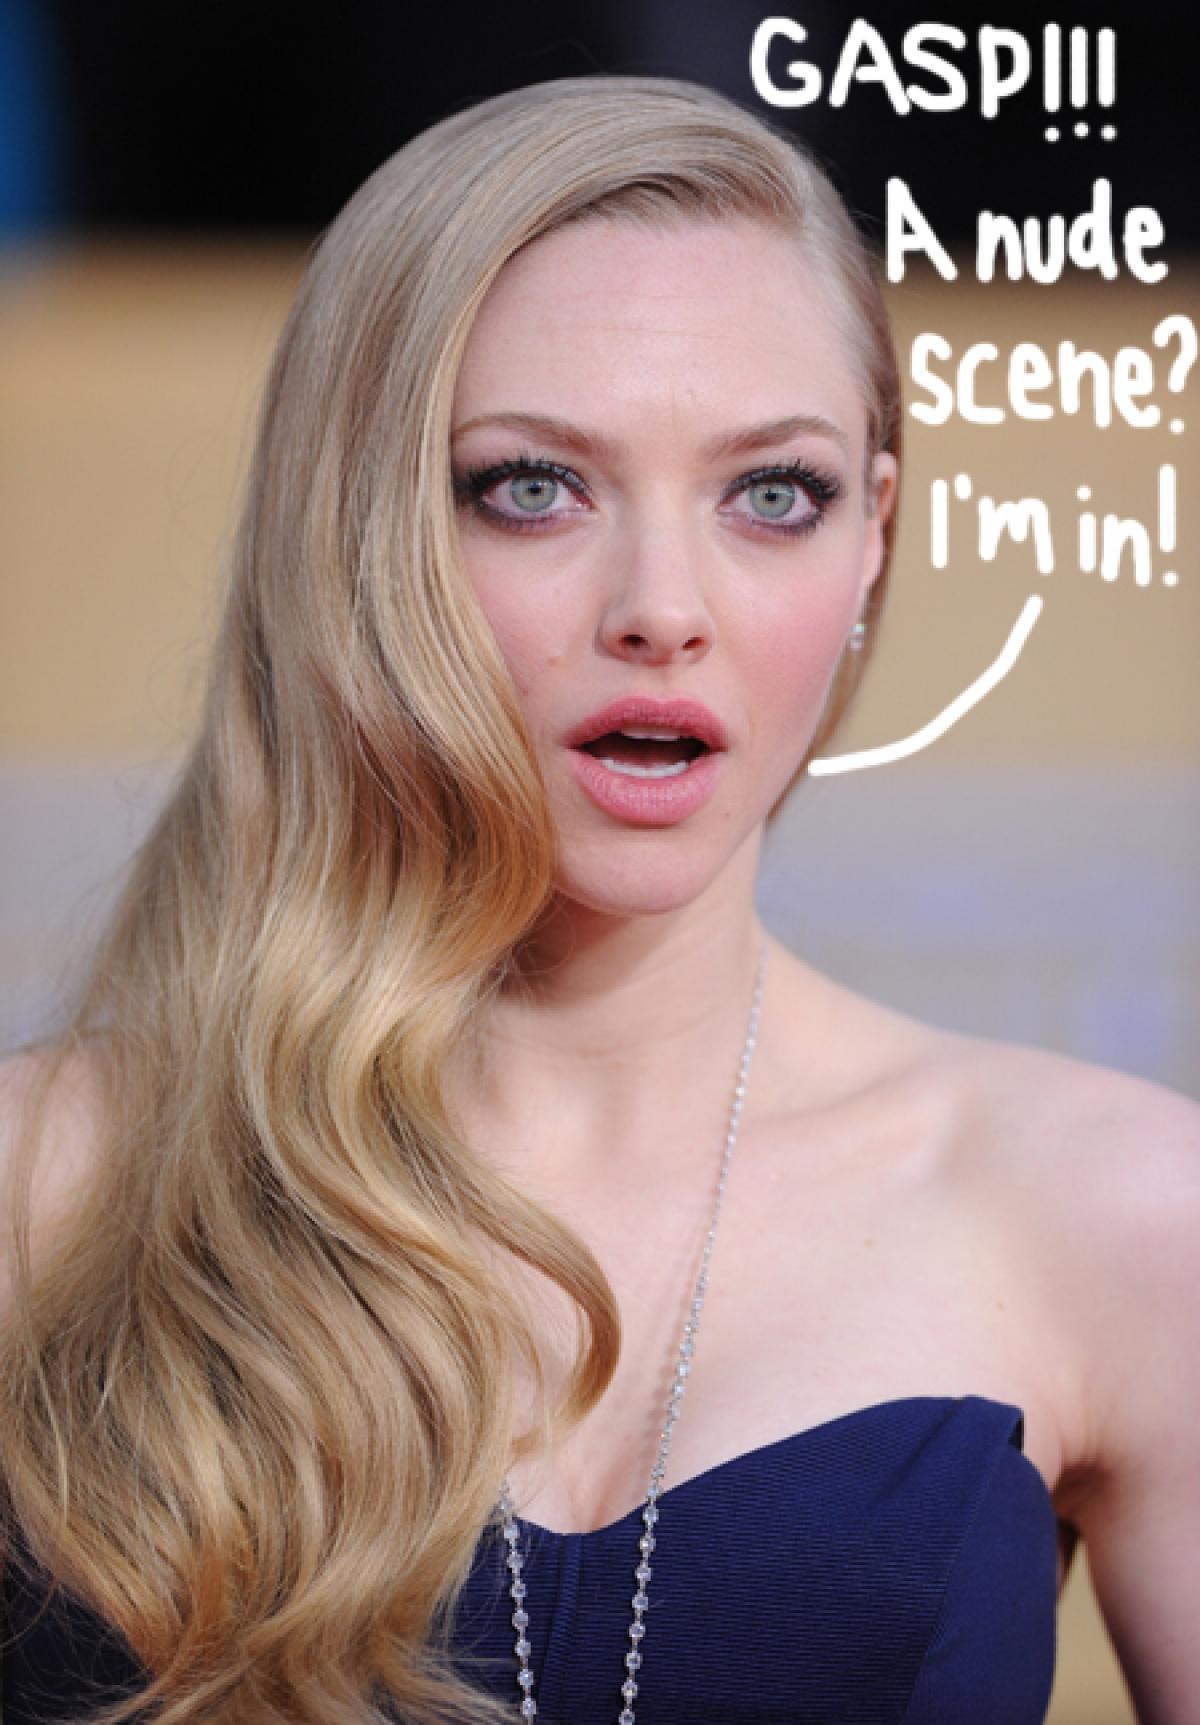 Amanda Seyfried Loved Her Lovelace Nude Scenes! Says They ...